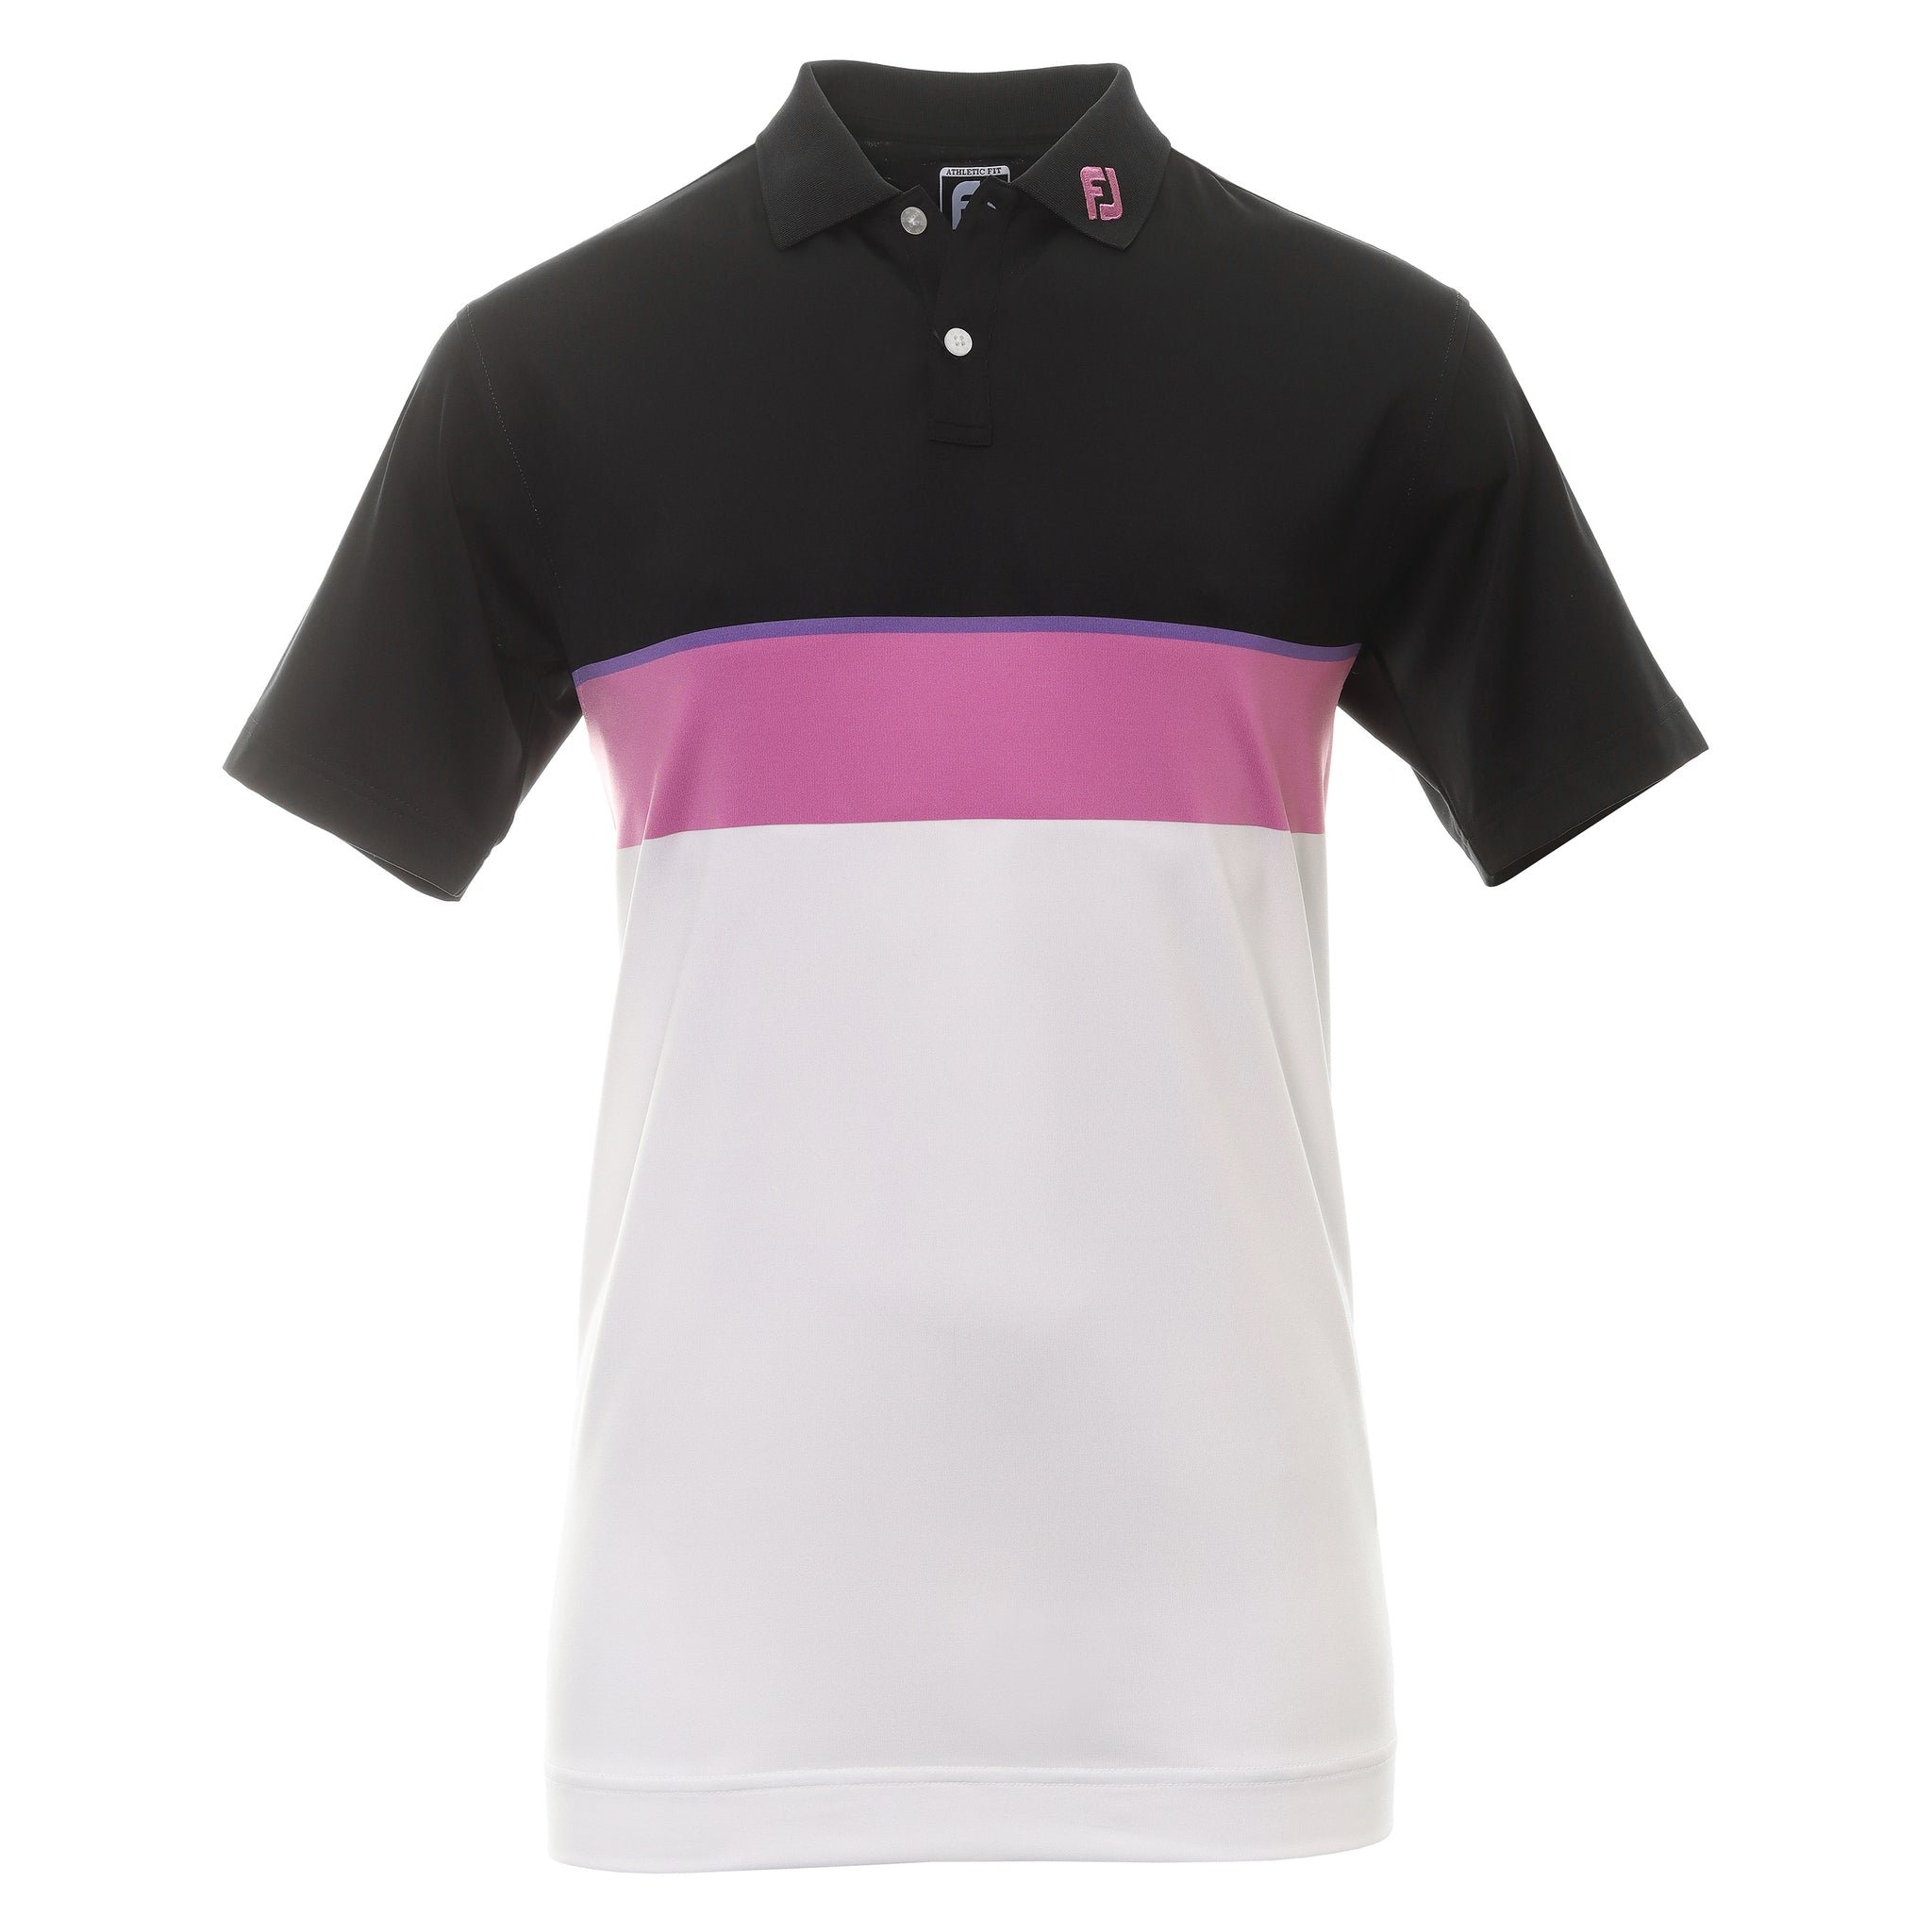 footjoy-colour-theory-golf-shirt-80096-80096-black-violet-orchid-white